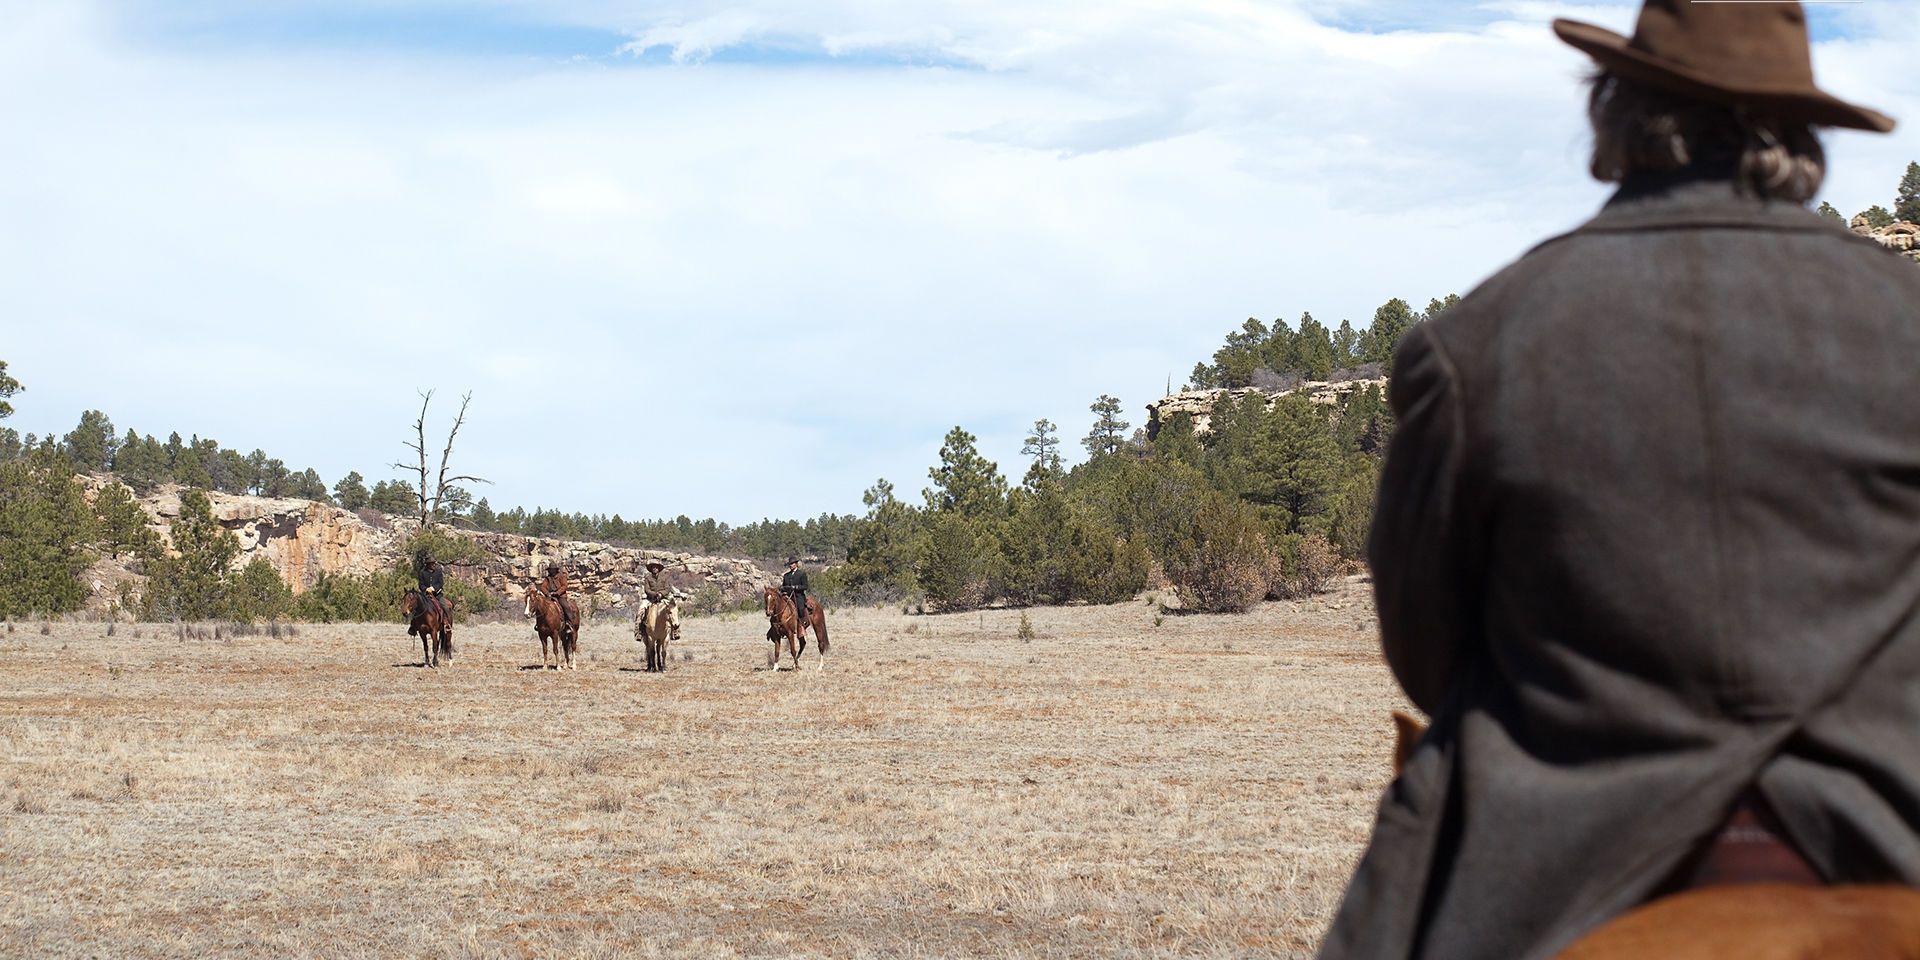 A rider stares down cowboys in True Grit